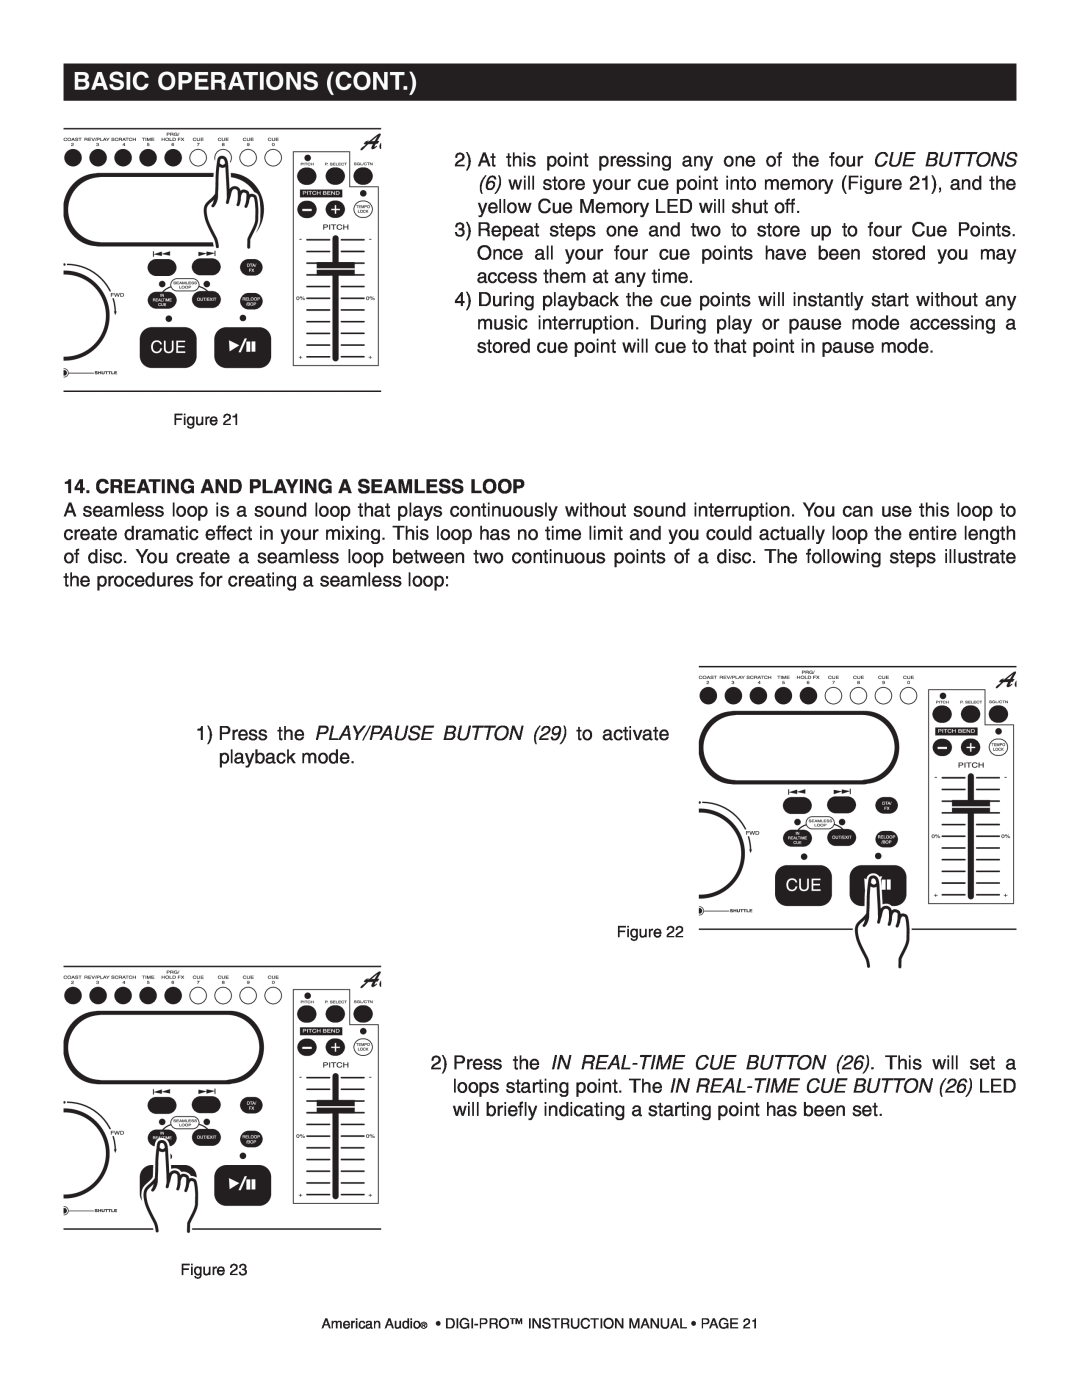 American Audio DIGI-PRO operating instructions Basic Operations Cont, Creating And Playing A Seamless Loop 